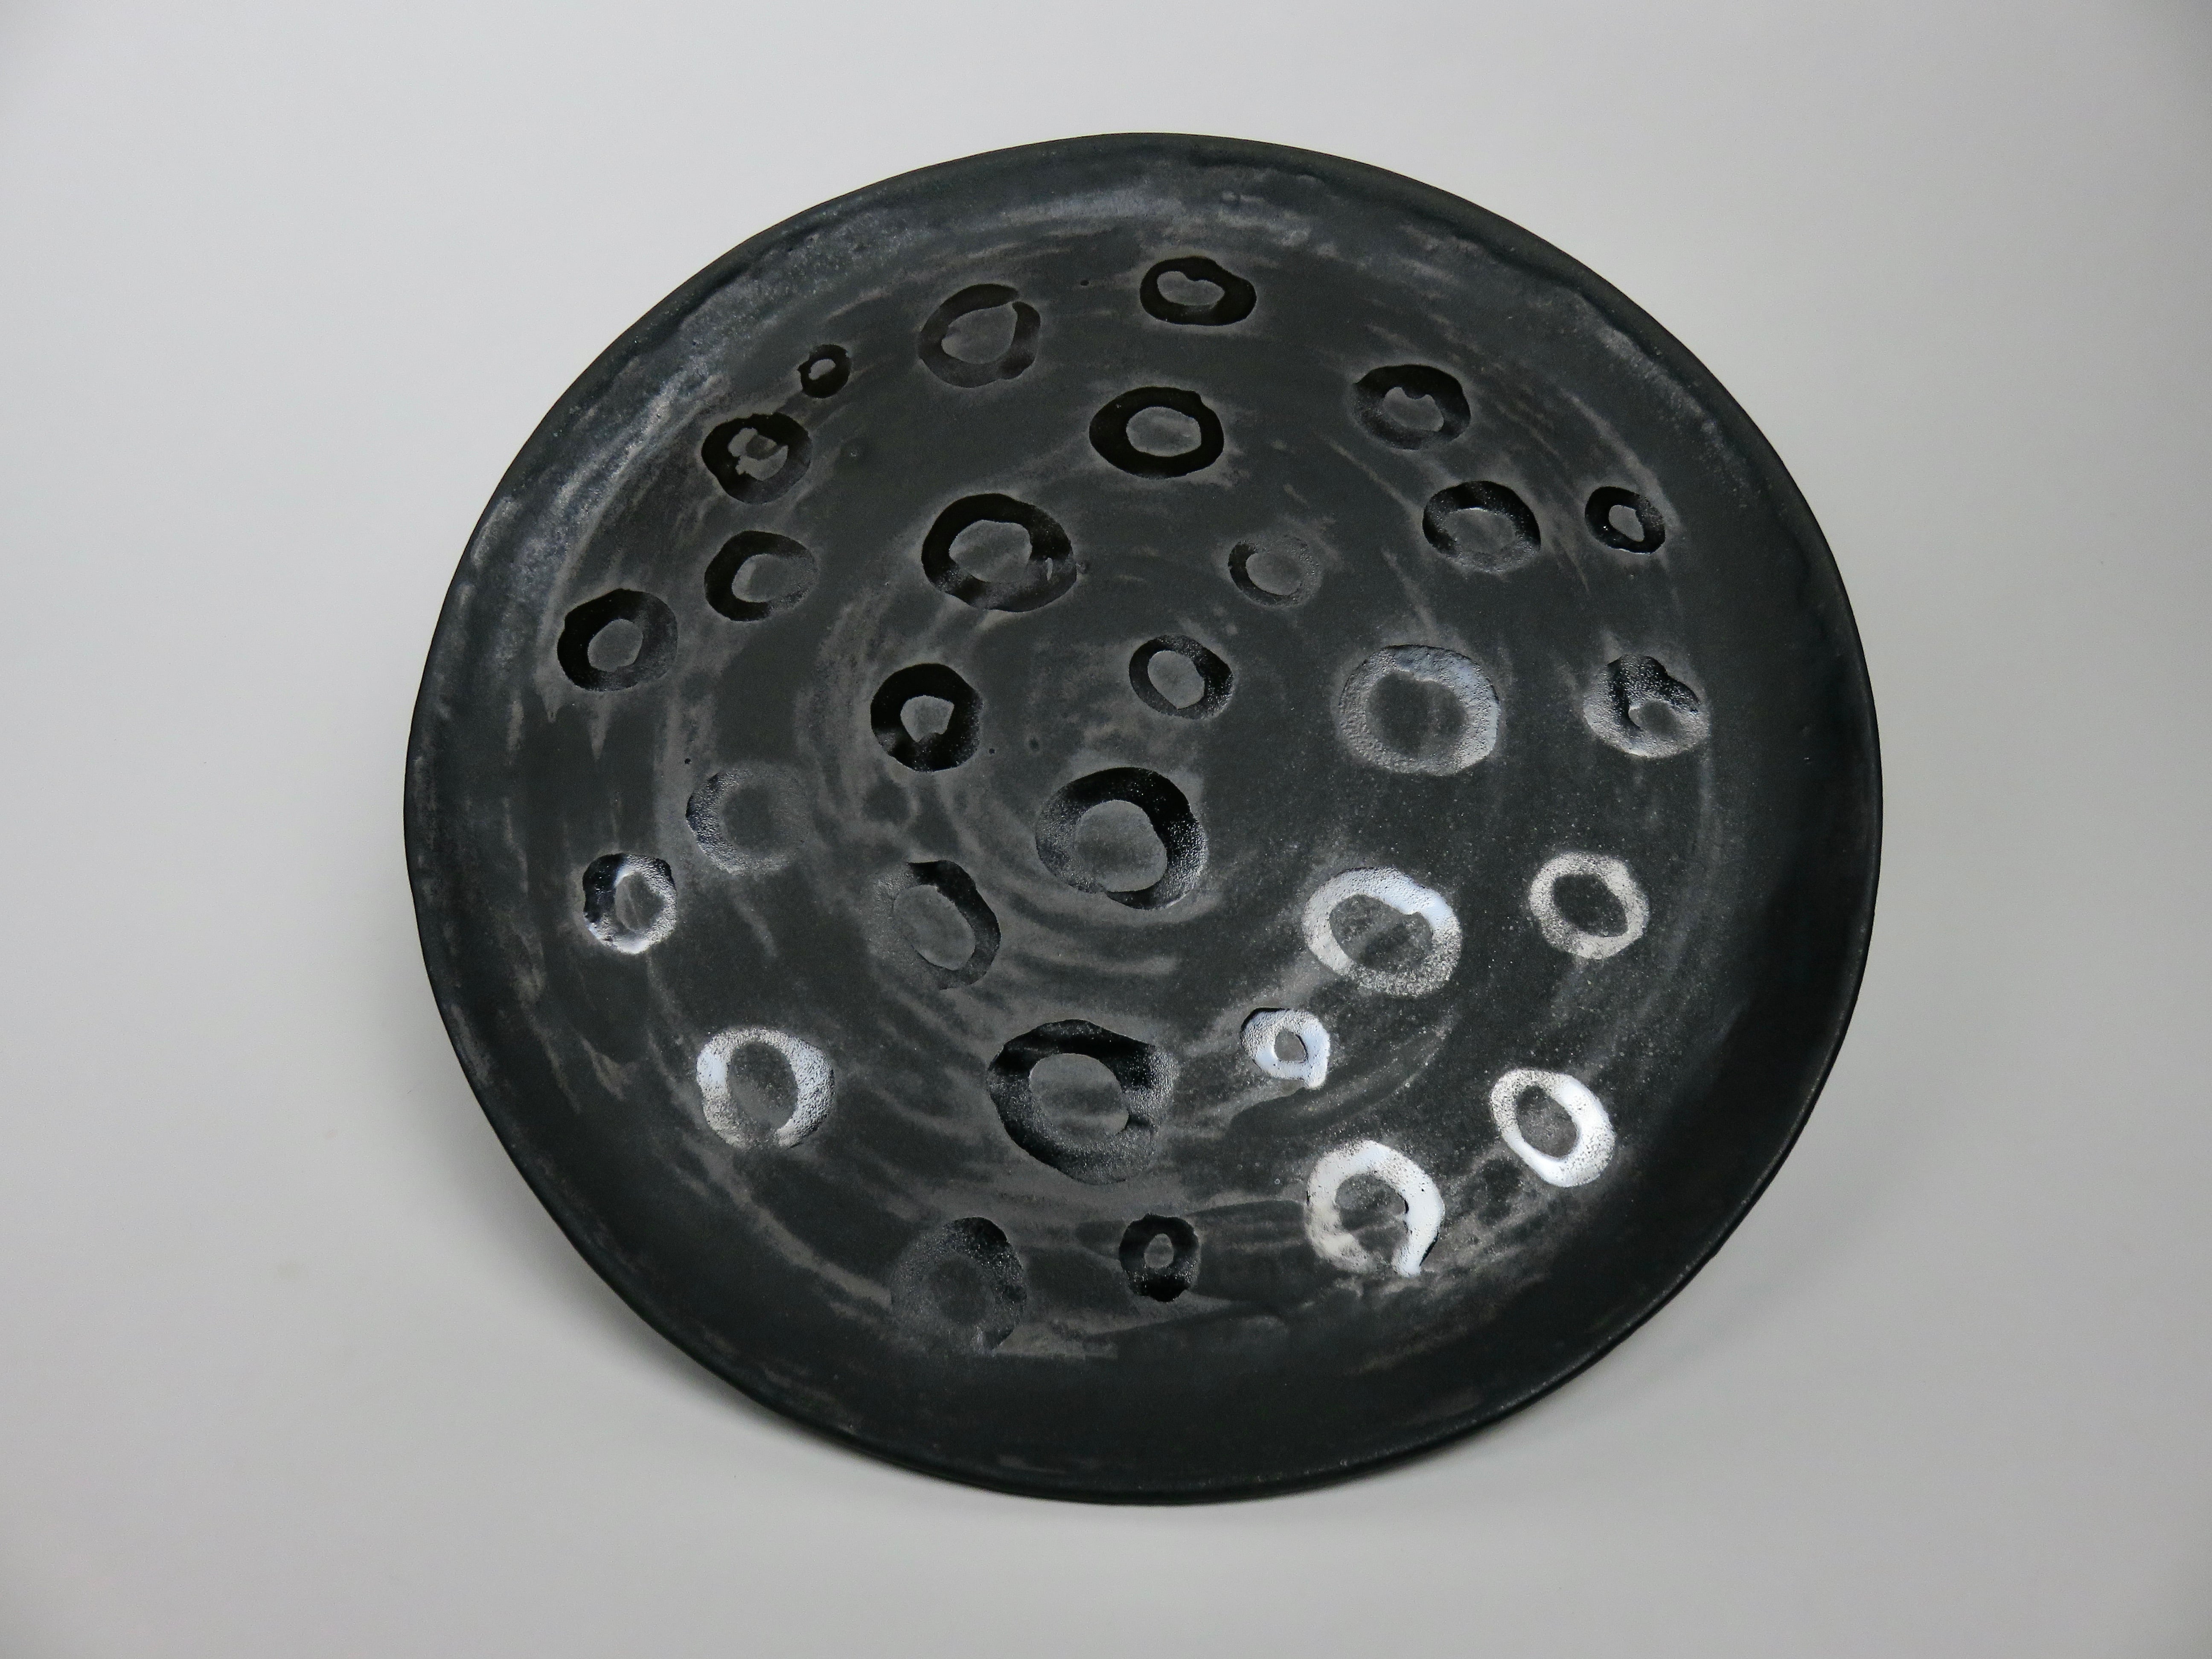 The Perfect Wedding Gift!
A fully hand built ceramic platter, in dark clay with black glaze and metallic black hand-painted decoration.  This is a unique creation, made by artist Helena Starcevic in her Hudson Valley Studio.
The hand-curved rim